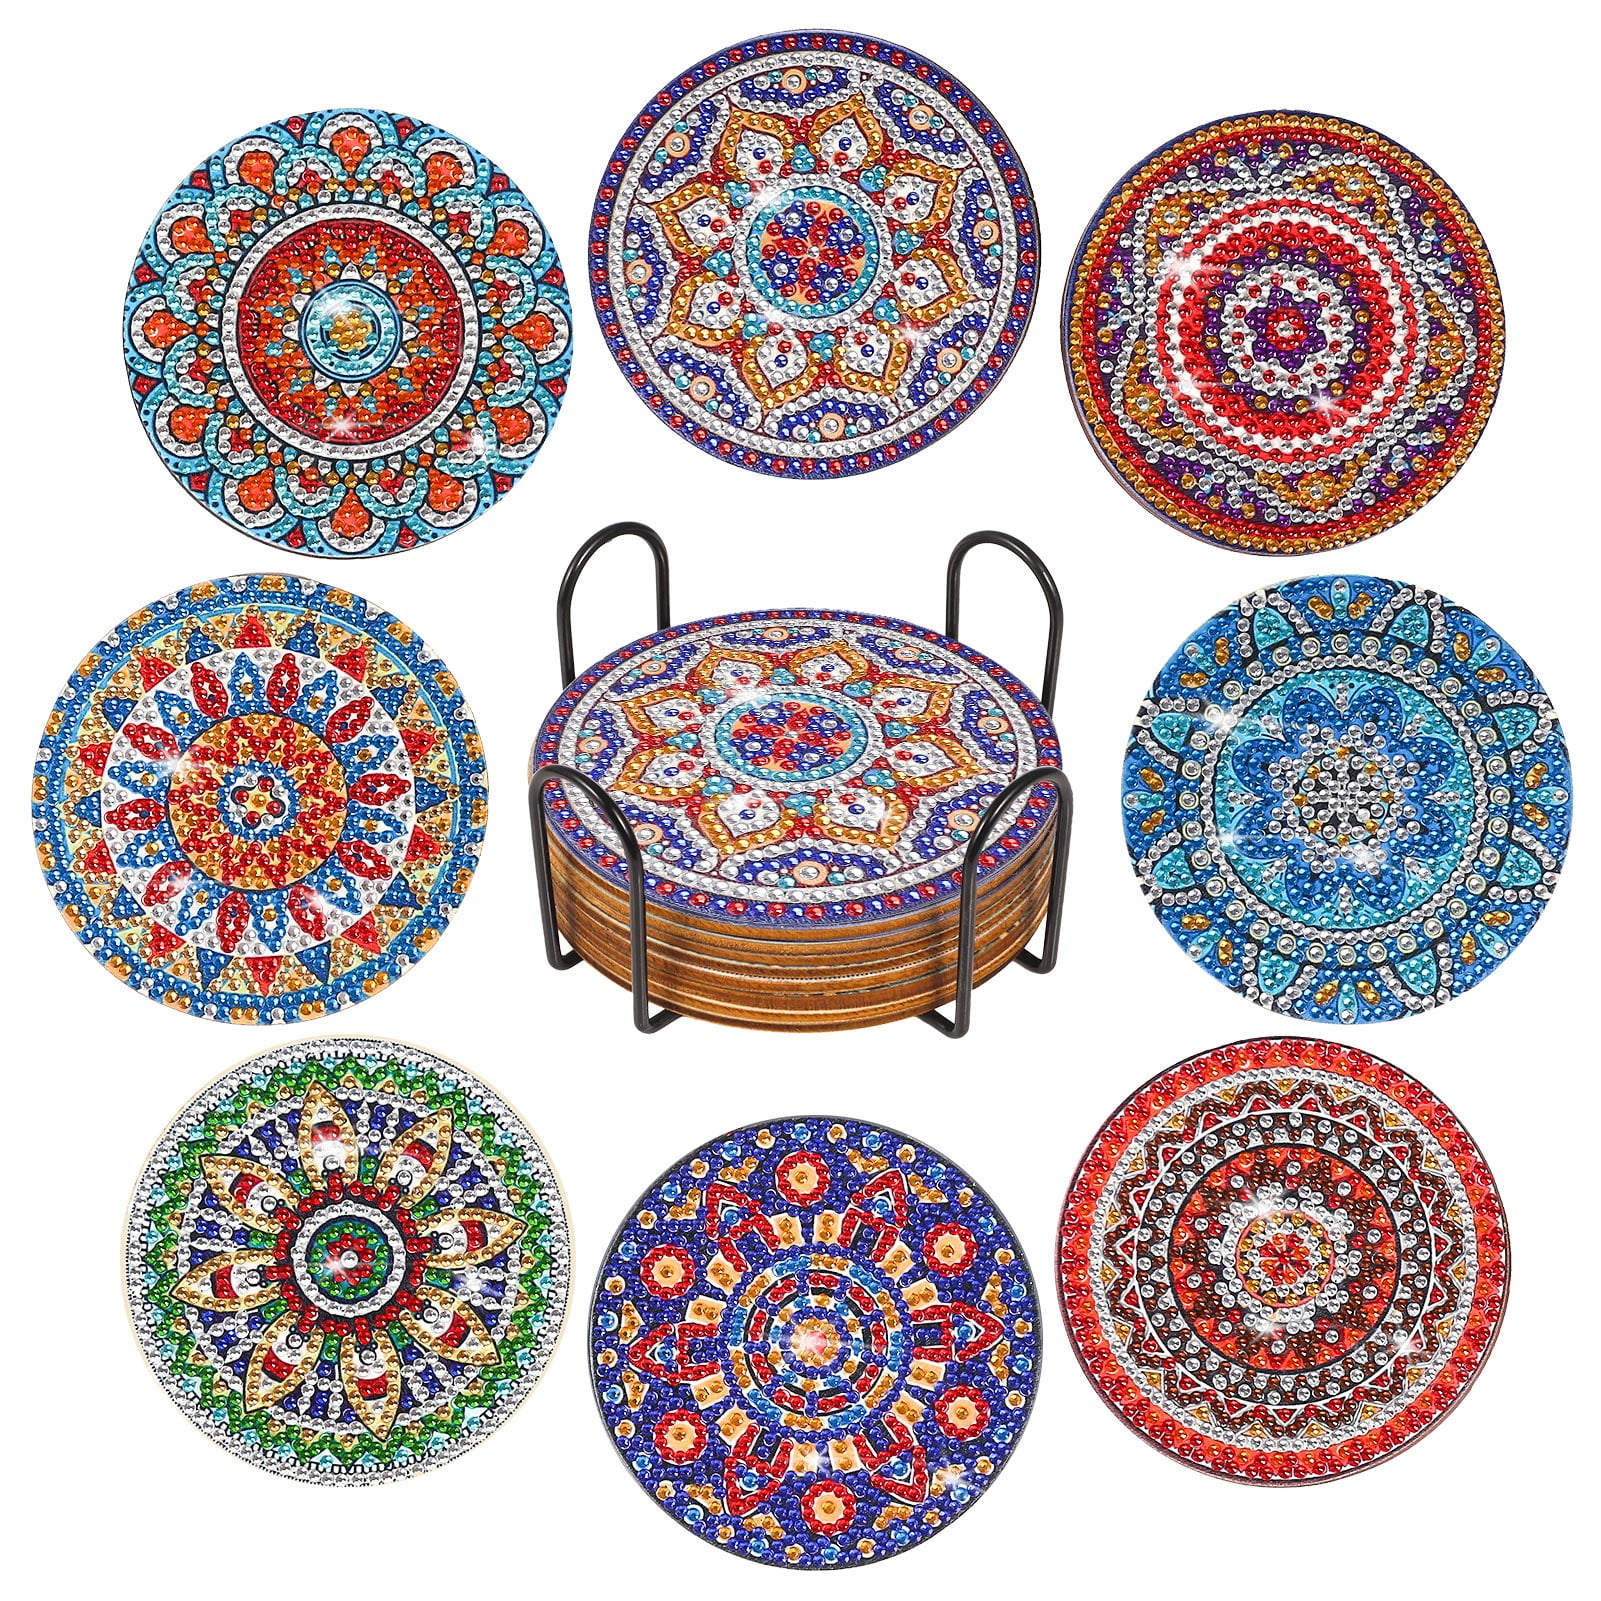 BEIHNUEM 8 Pcs Diamond Painting Coasters with Holder, DIY Mandala Drink Coasters Diamond Painting Kits for Table Protection 5D Diamond Art Kits